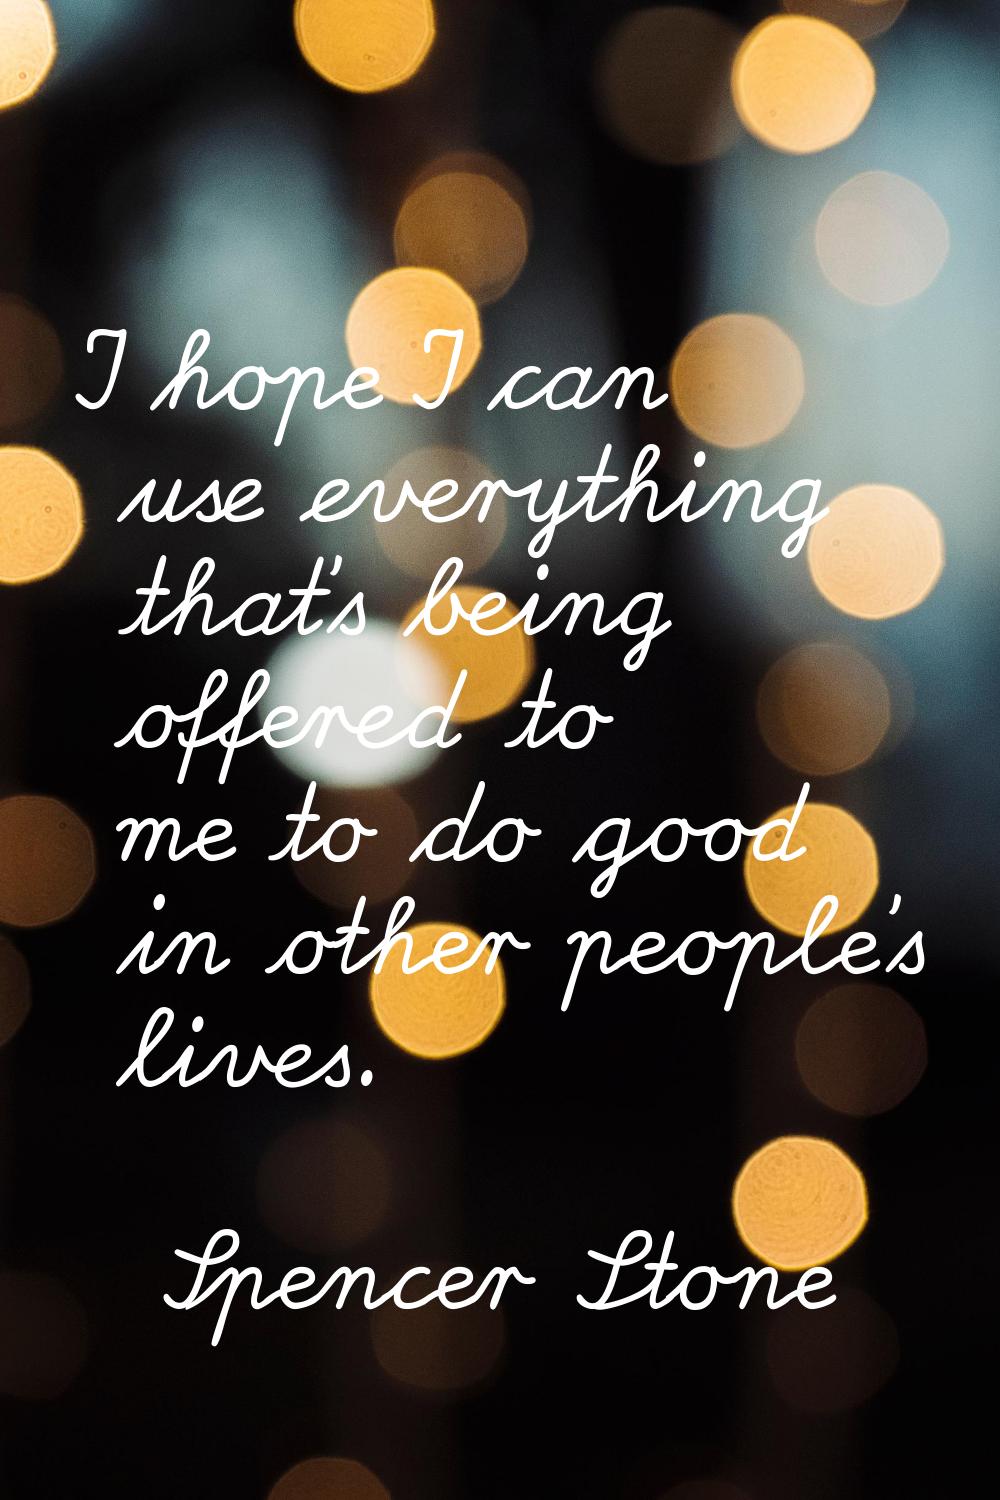 I hope I can use everything that's being offered to me to do good in other people's lives.